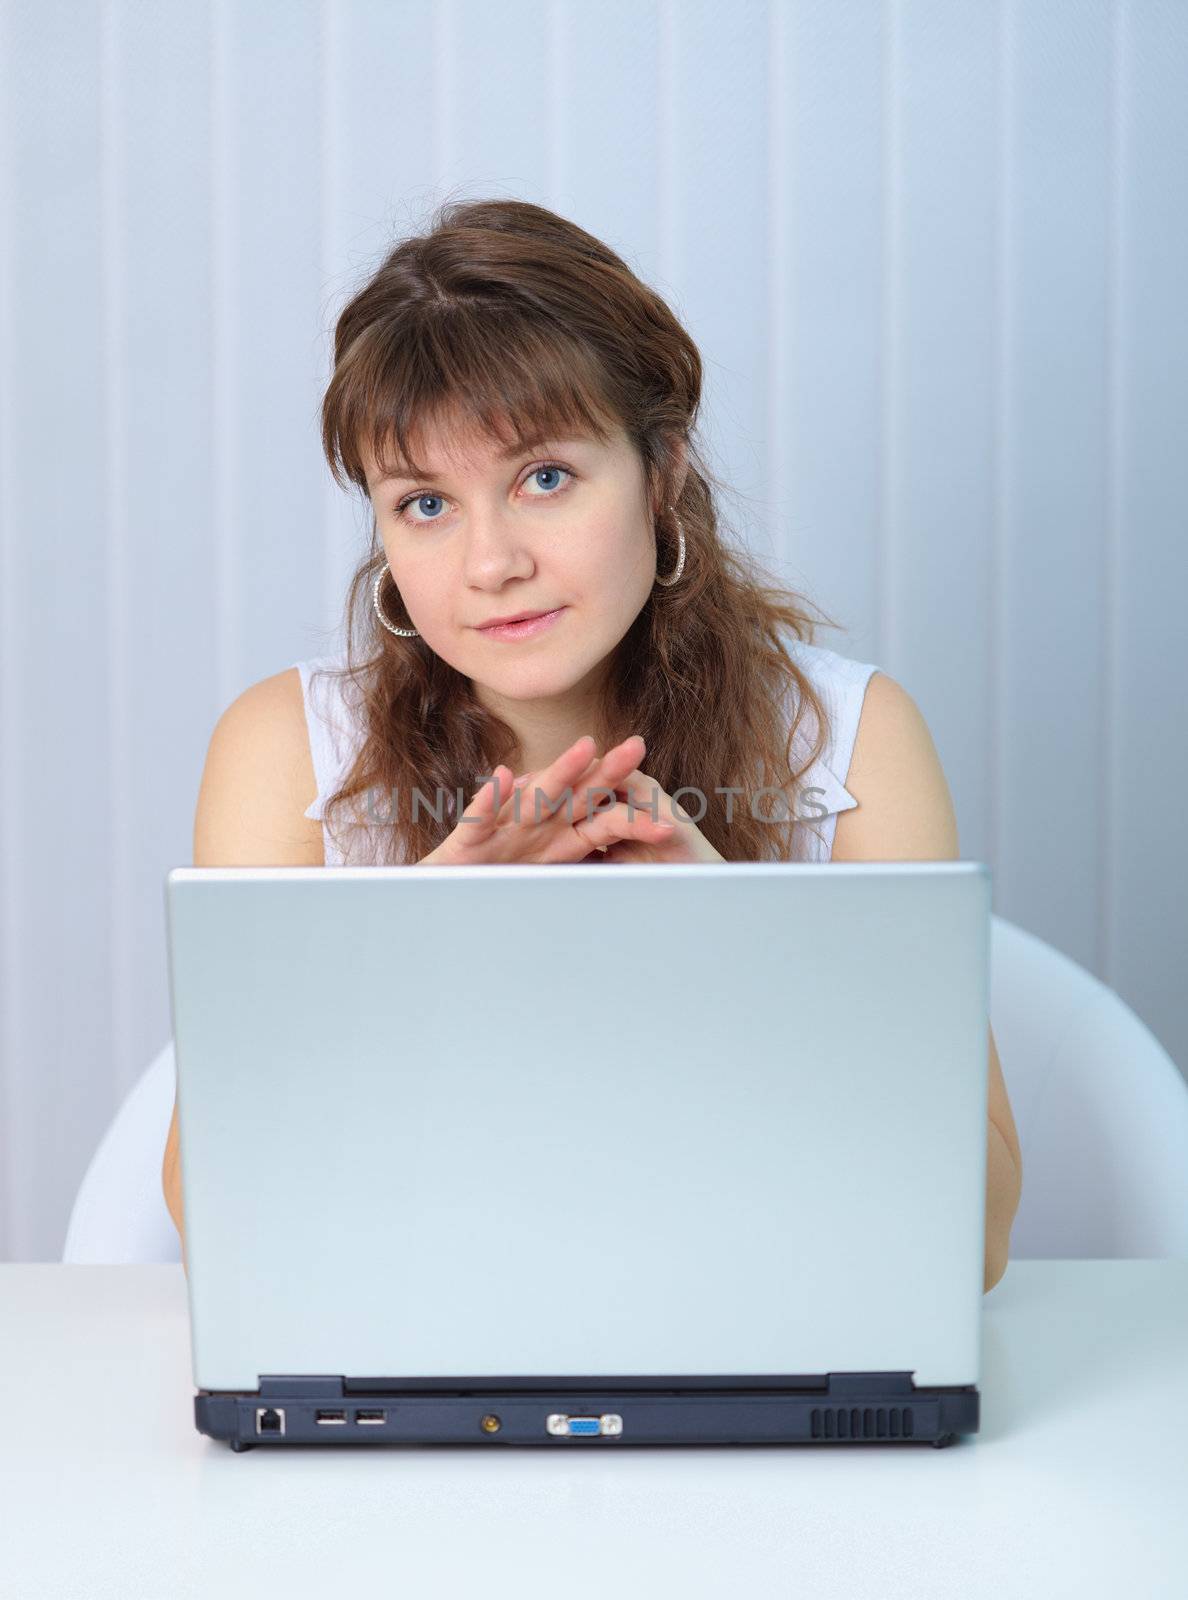 The young beautiful woman sits with the big laptop